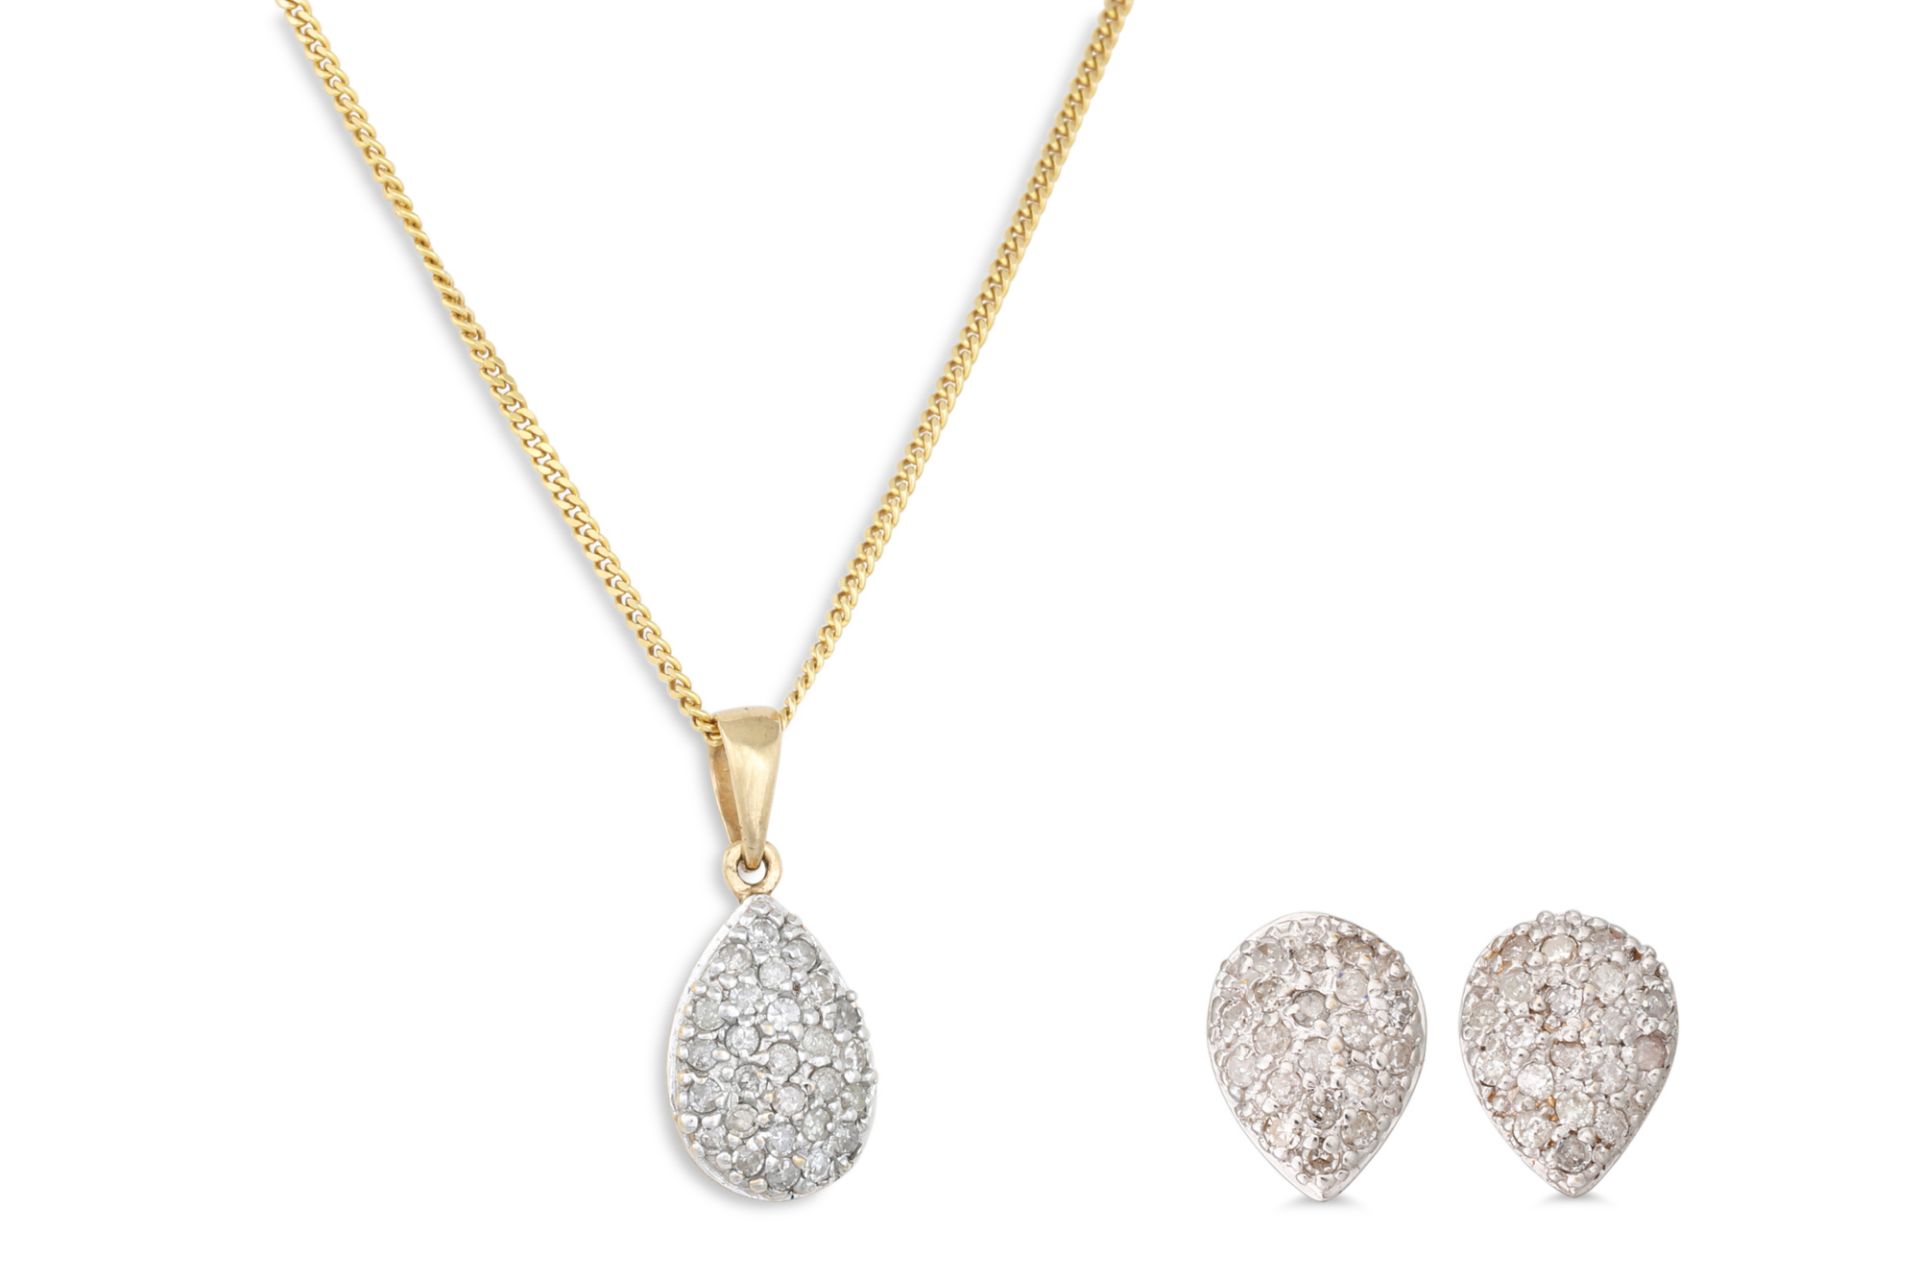 A PAIR OF DIAMOND CLUSTER EARRINGS, pear shaped, with matching pendant, on a 9ct gold chain